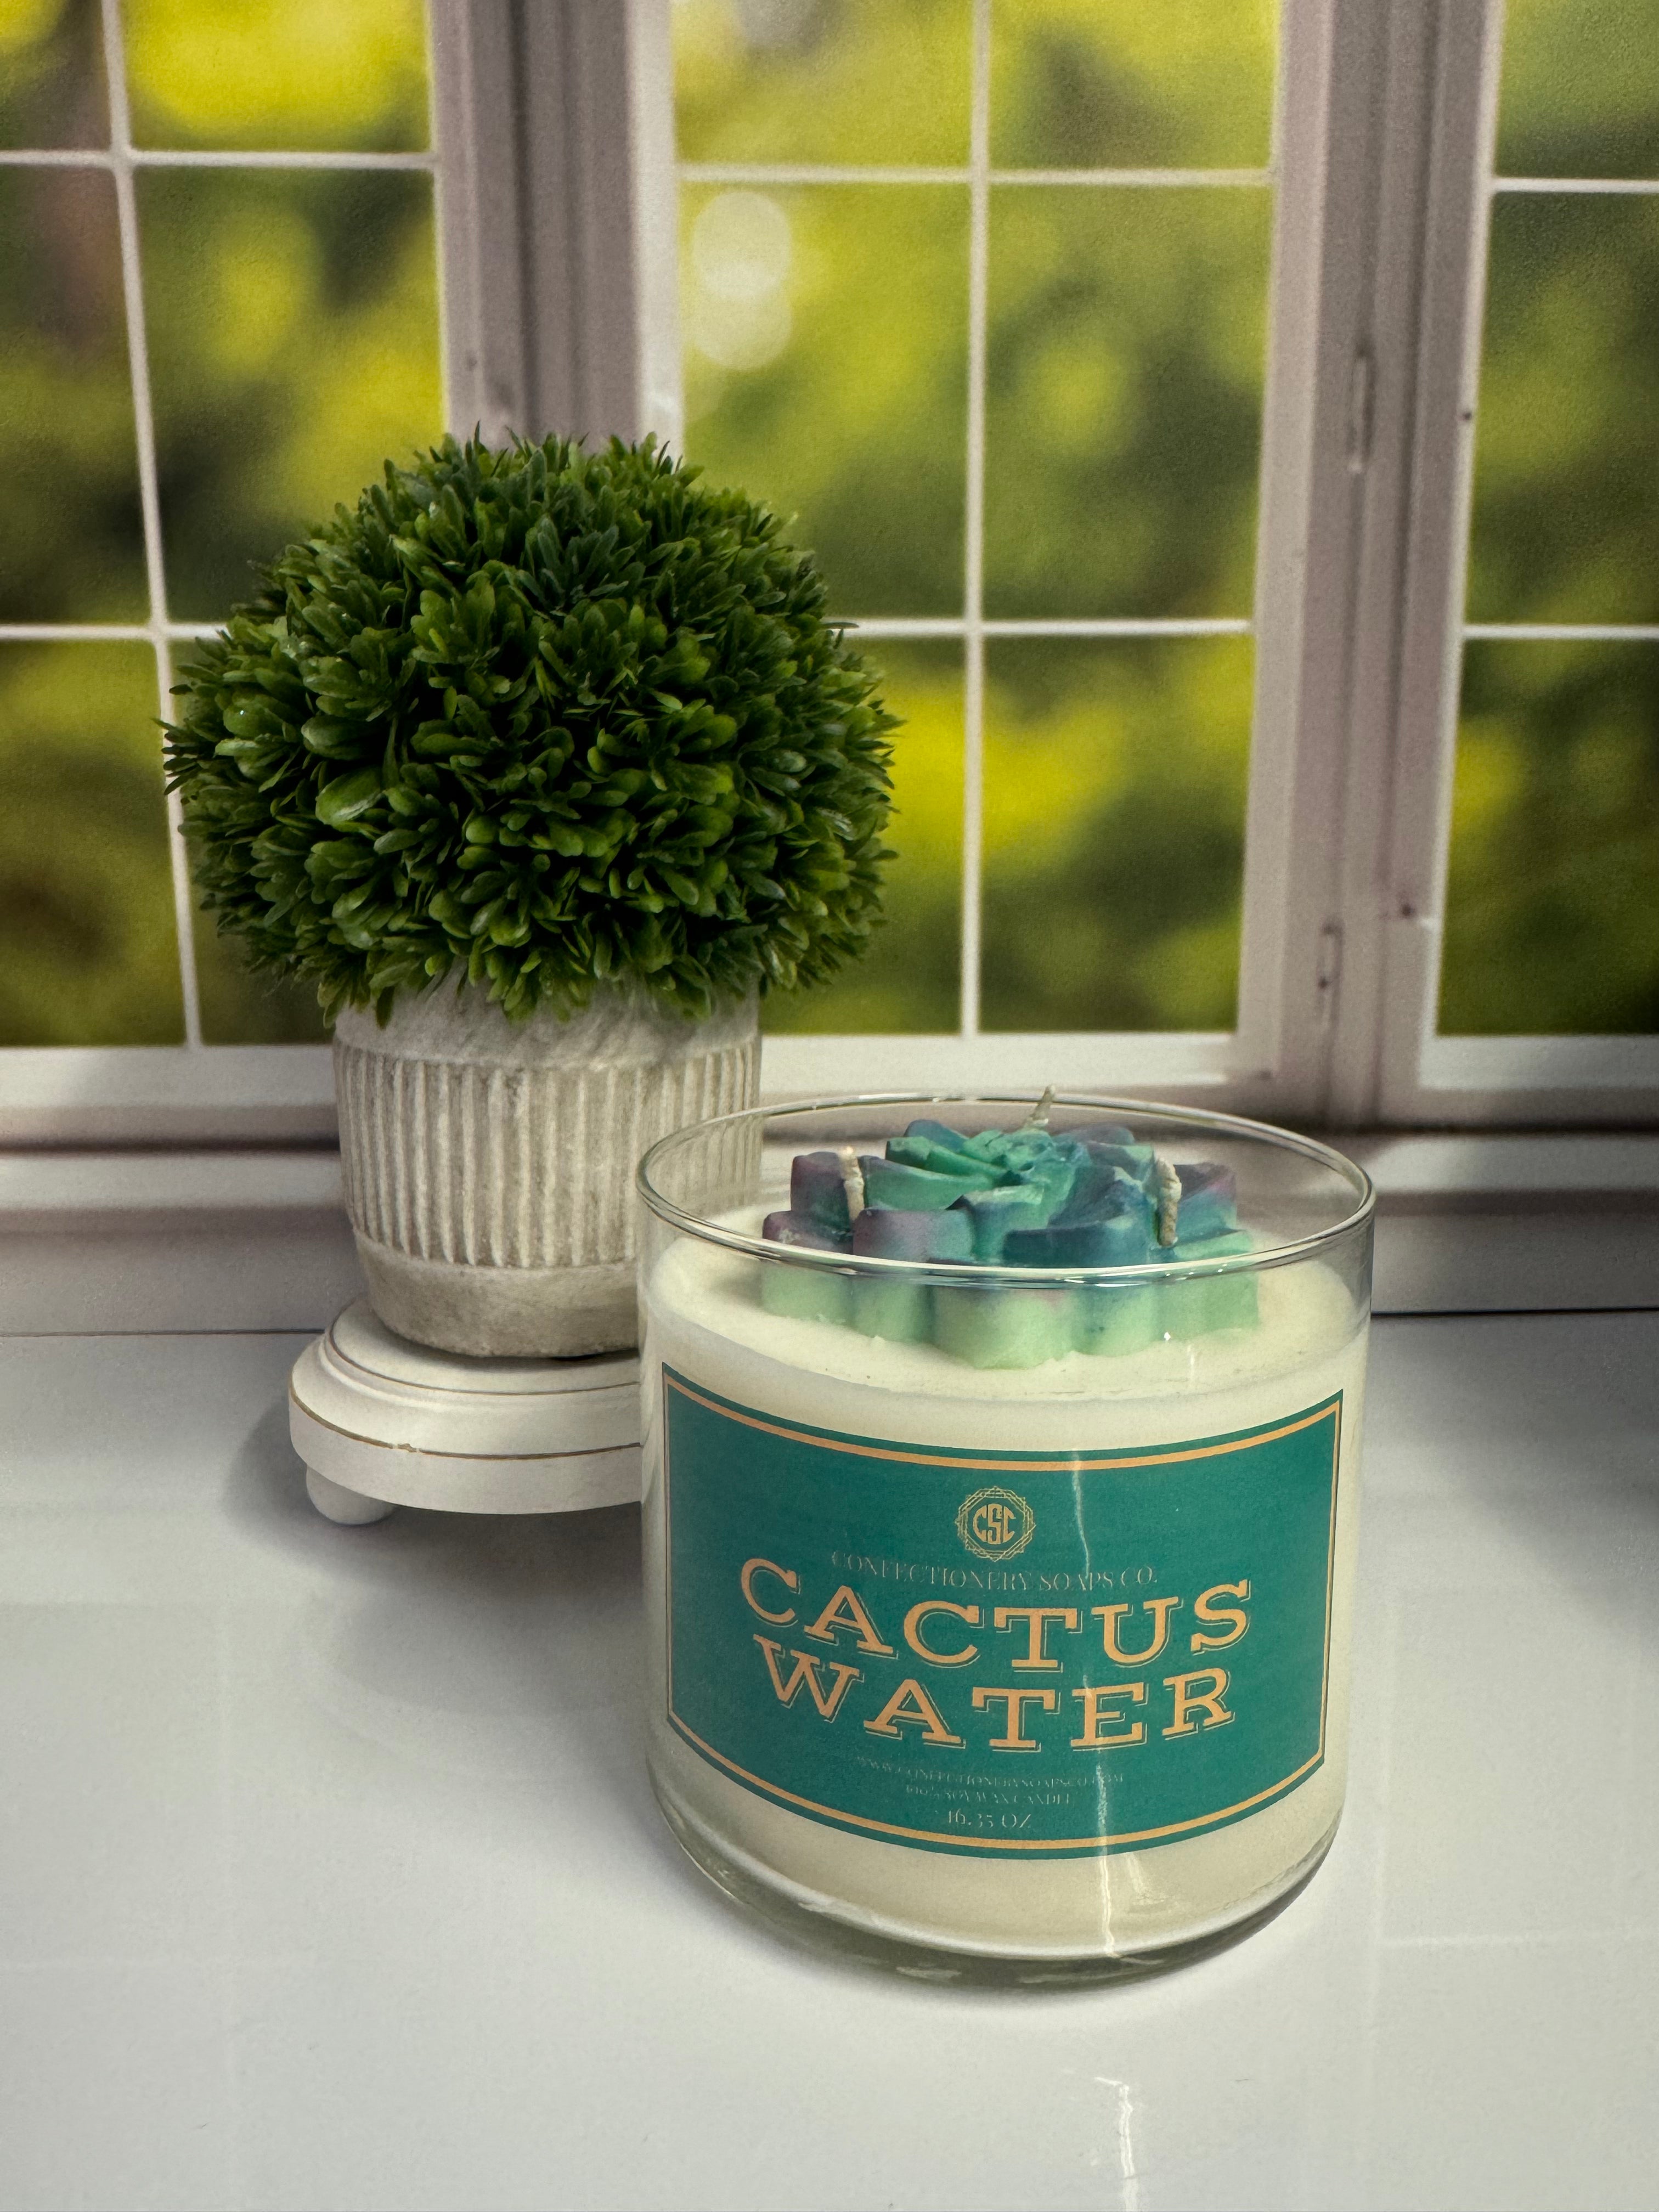 Cactus Water 16 oz glass Candle